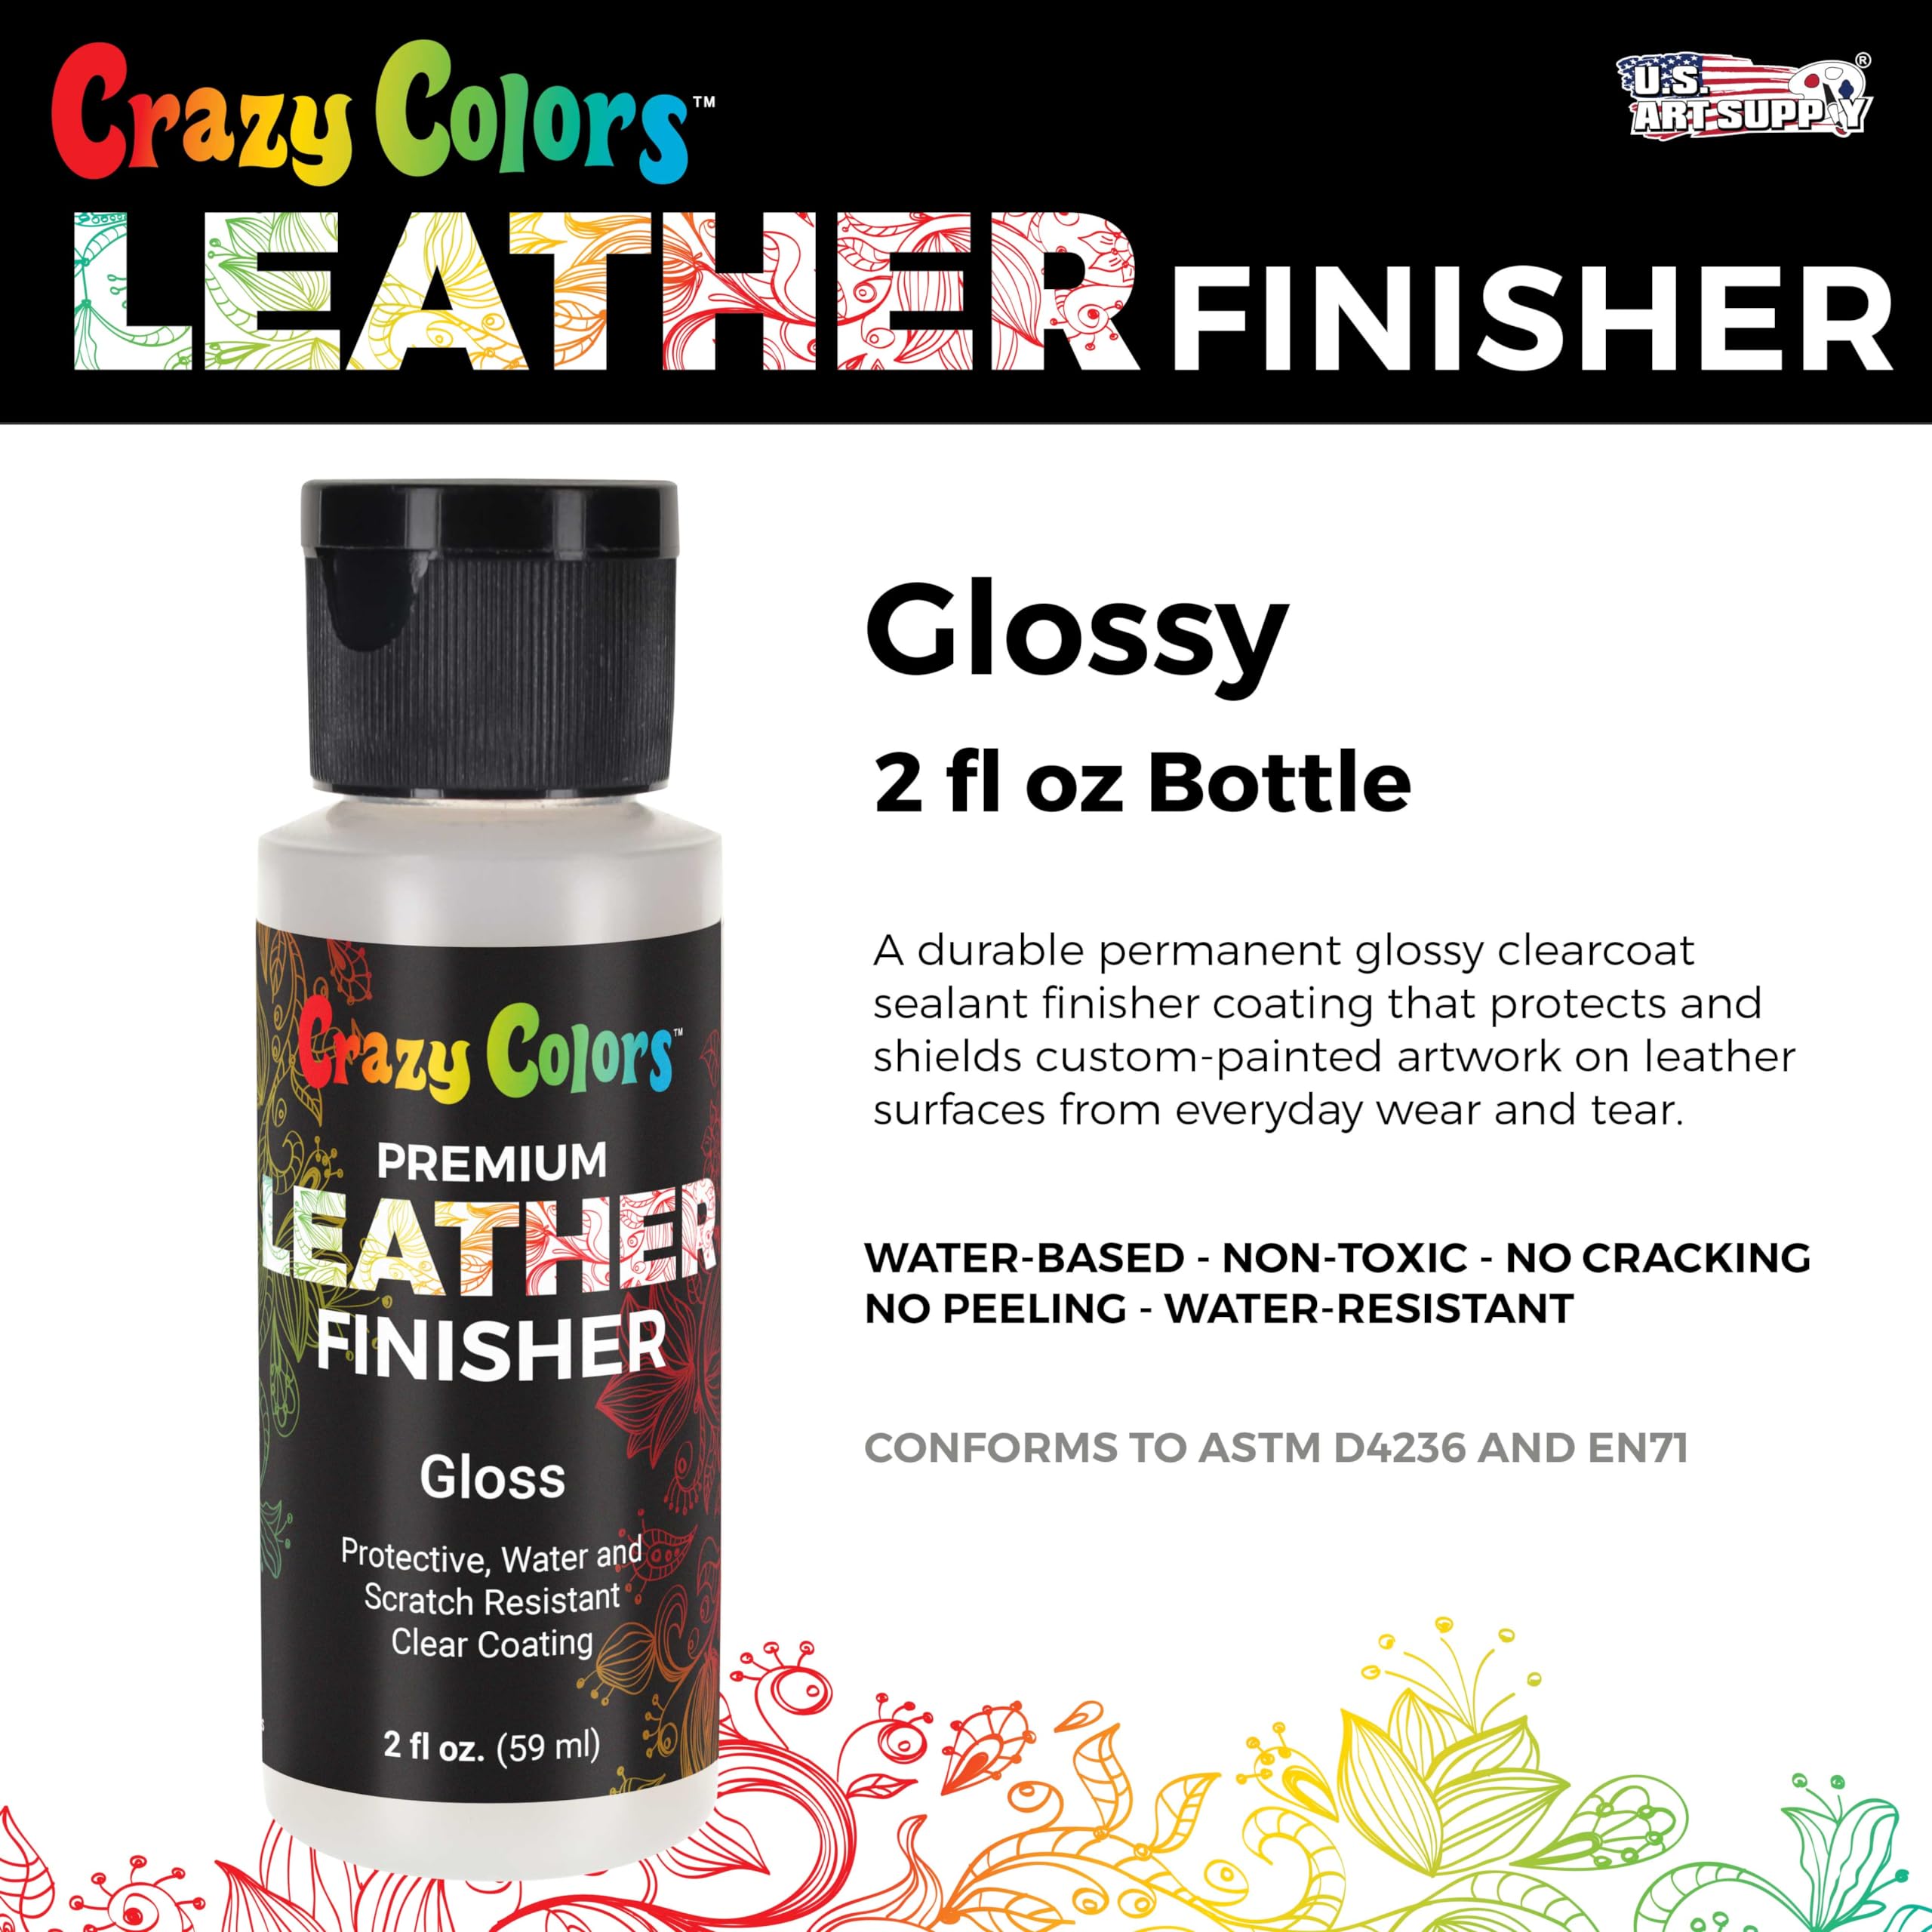 Crazy Colors Premium Gloss Acrylic Leather and Shoe Paint Finisher, 2 oz Bottle - Clearcoat Sealant Protection - Durable Scratch, Crack, Peel, and Fade Resistant Finish - Artwork Jackets, Bags, Purses